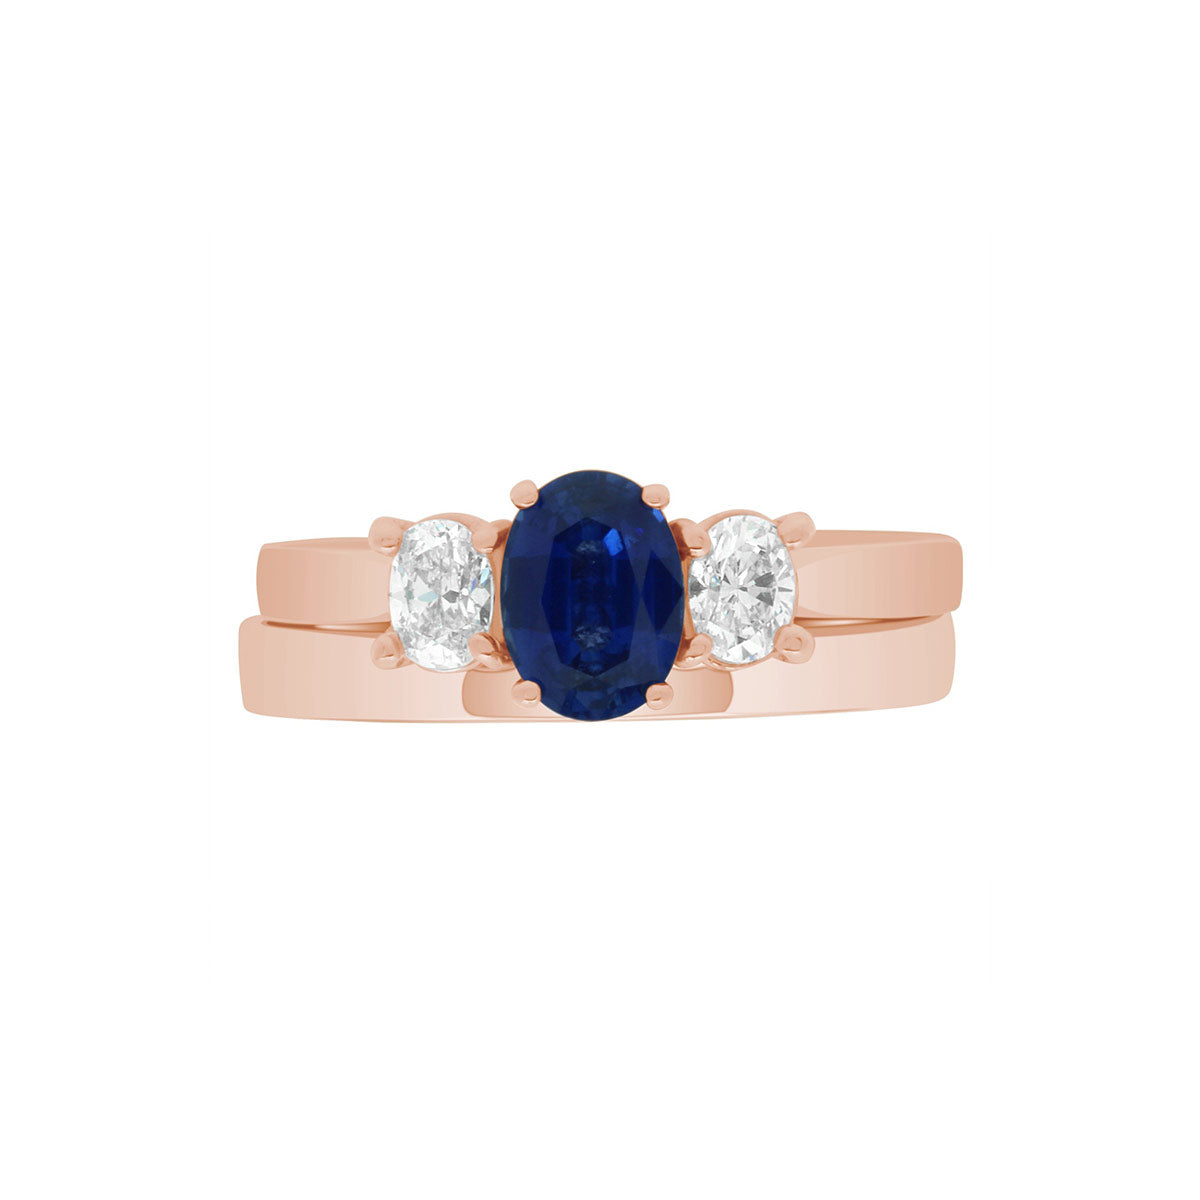 Sapphire &amp; Diamond Trilogy Ring made from red gold with a matching red gold wedding band